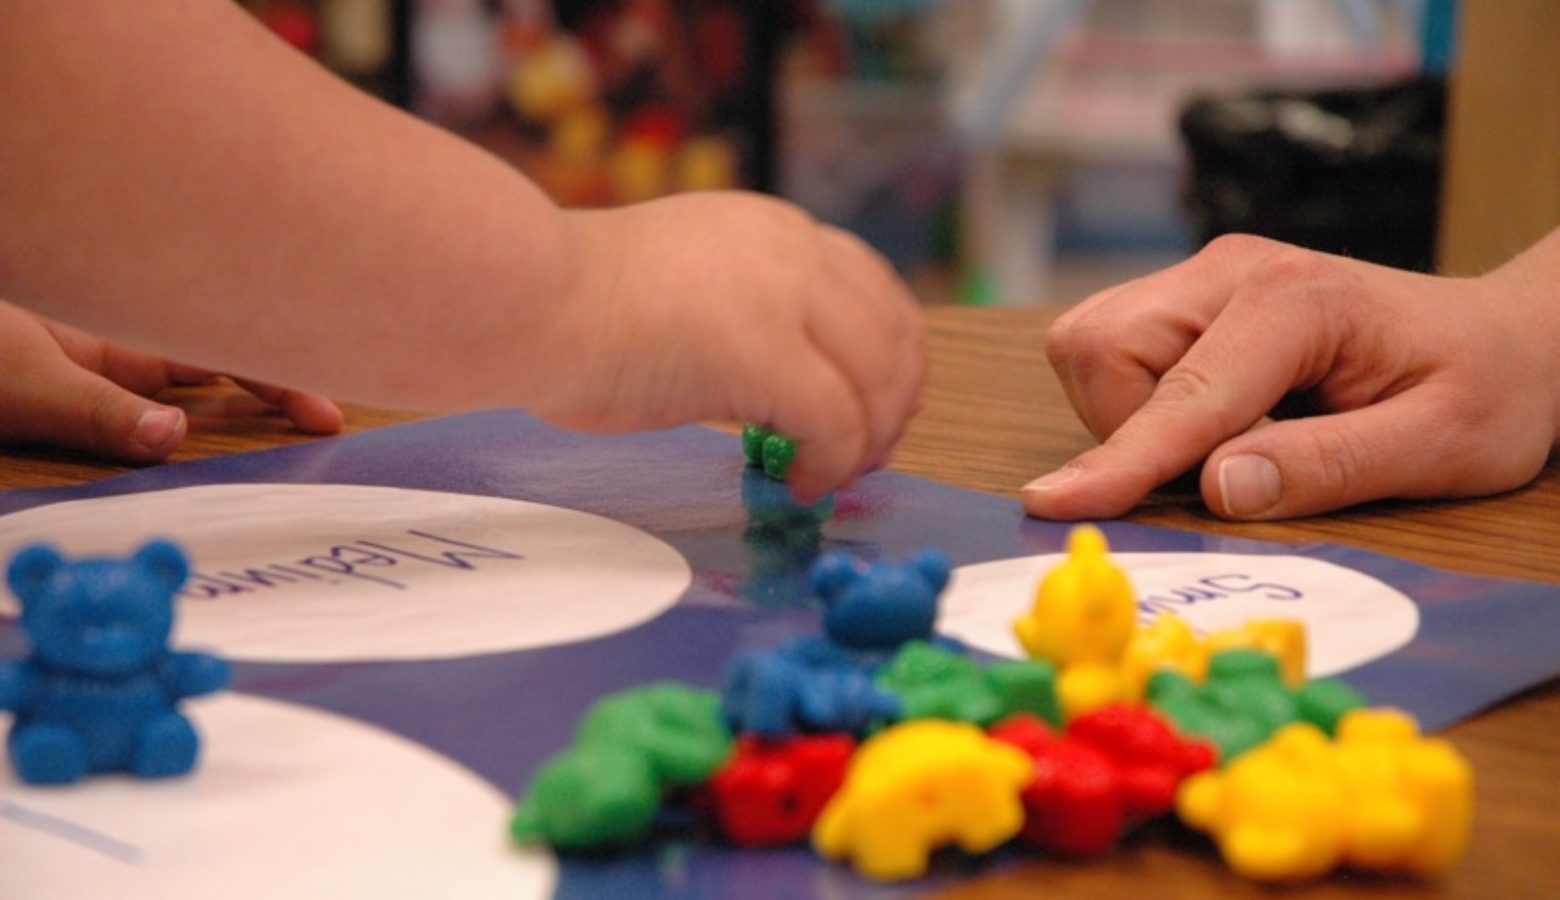 Indiana's preschool pilot program would expand to 15 new counties and include a controversial option for online preschool under legislation heading to the governor's desk. (Barnaby Wasson/Flickr)